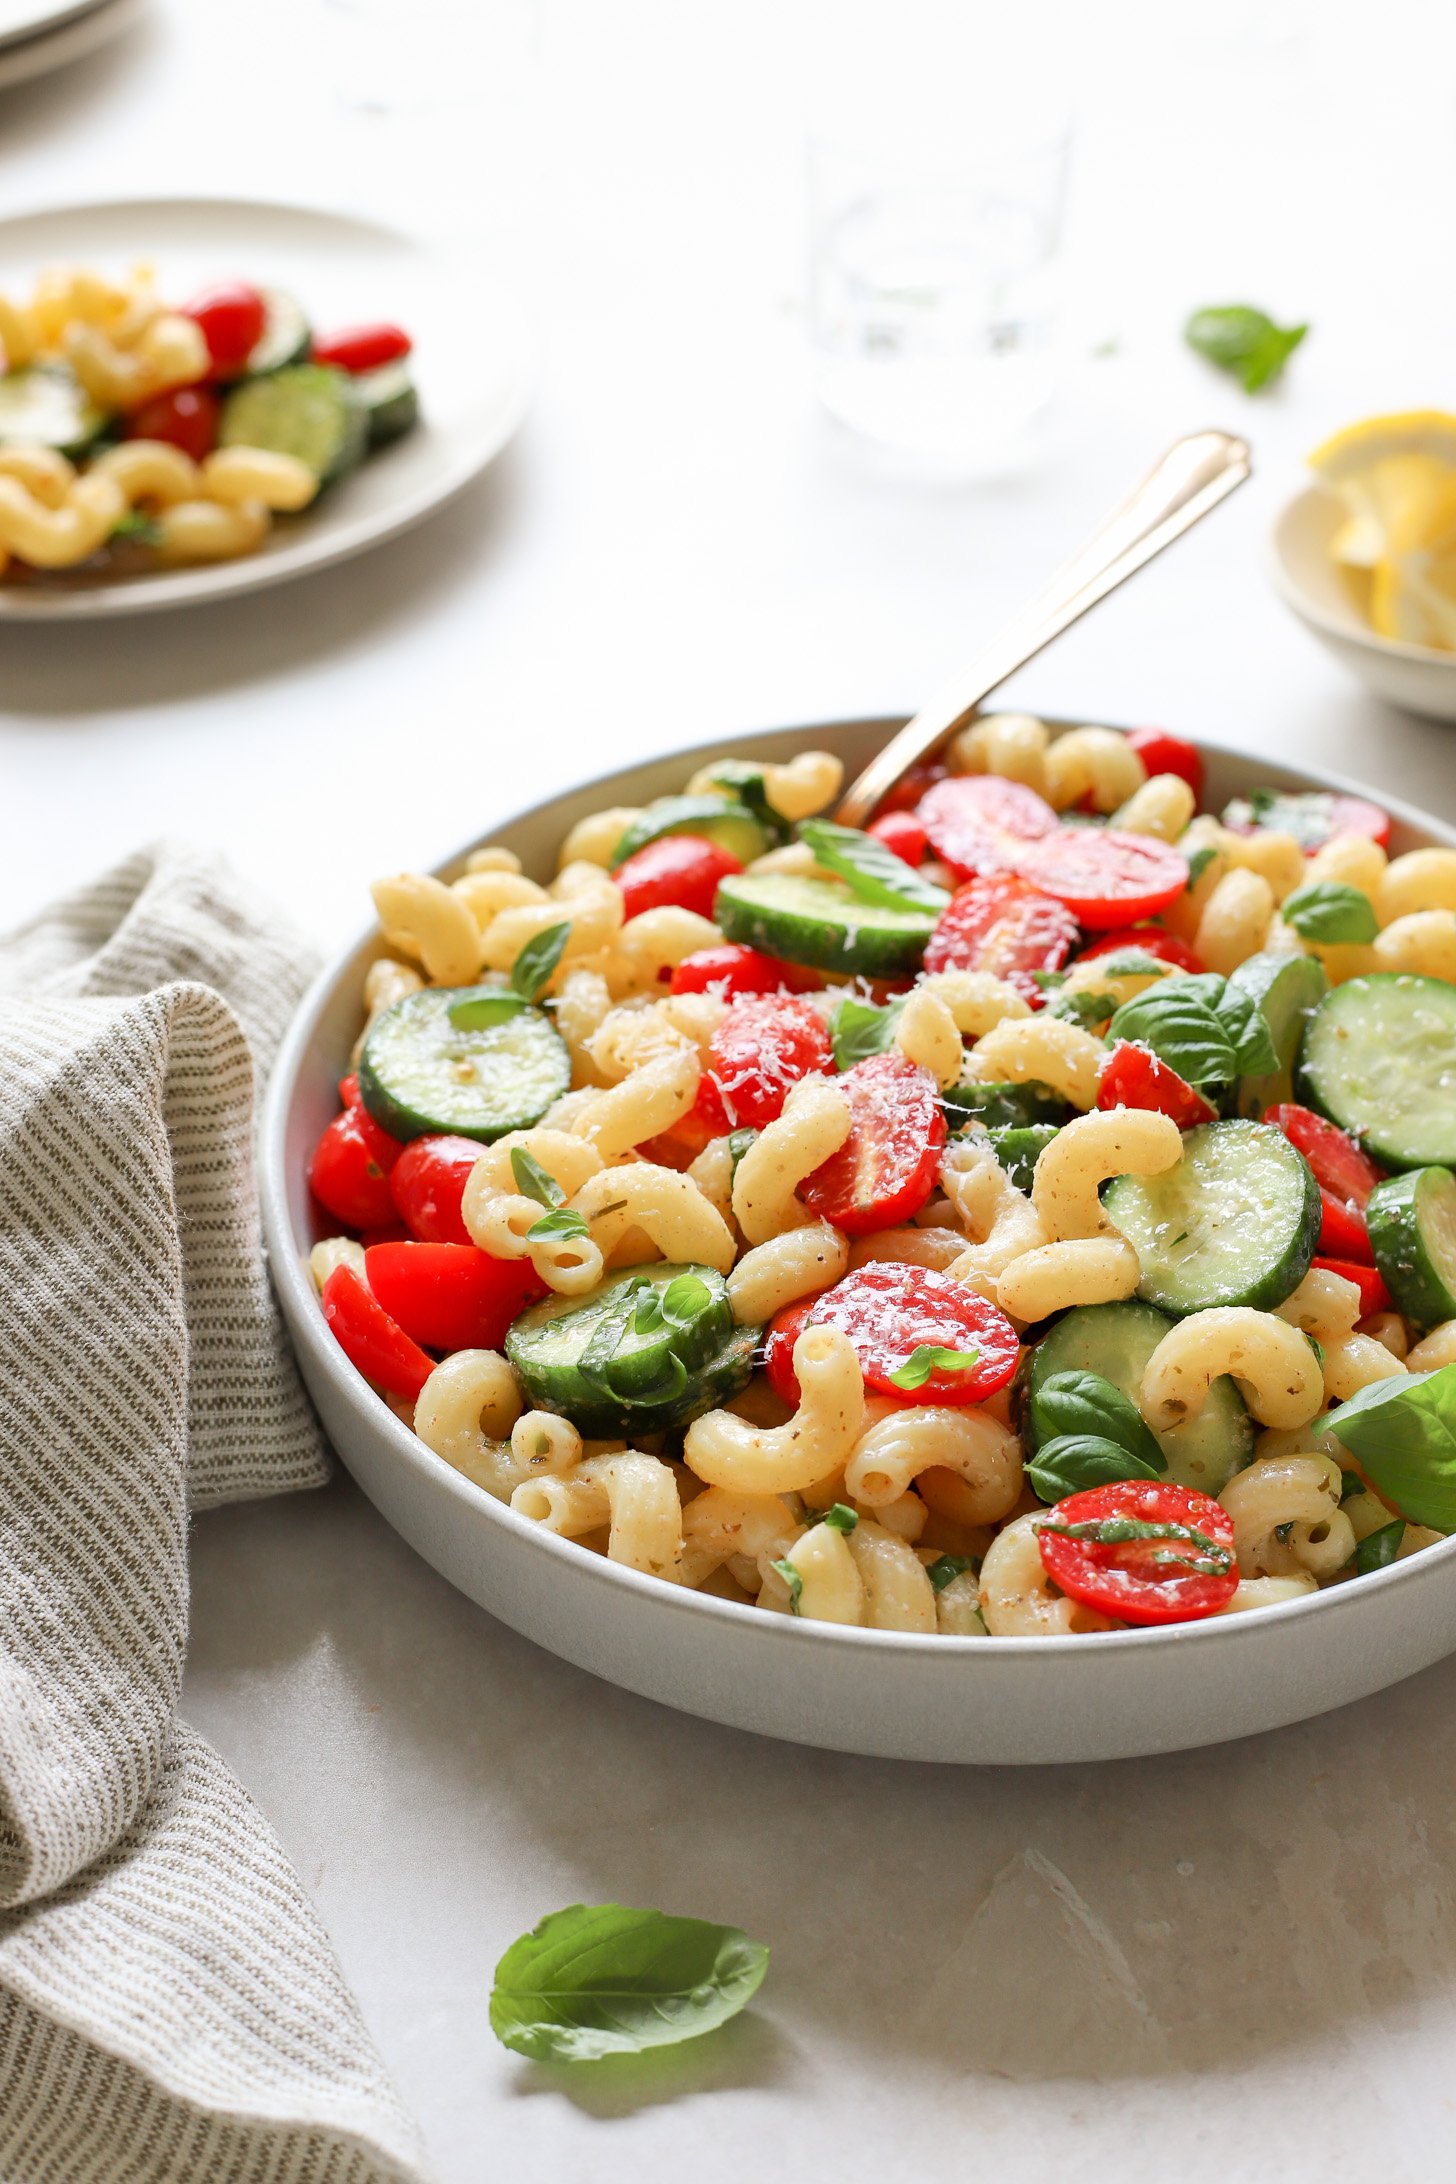 A bowl of cucumber tomato pasta salad in a white bowl on a table with a striped napkin. There is a spoon in the bowl and there is a serving of salad on a plate in the corner,  bowl of sliced lemons, plates and a glass of water on the table next to the bowl. 